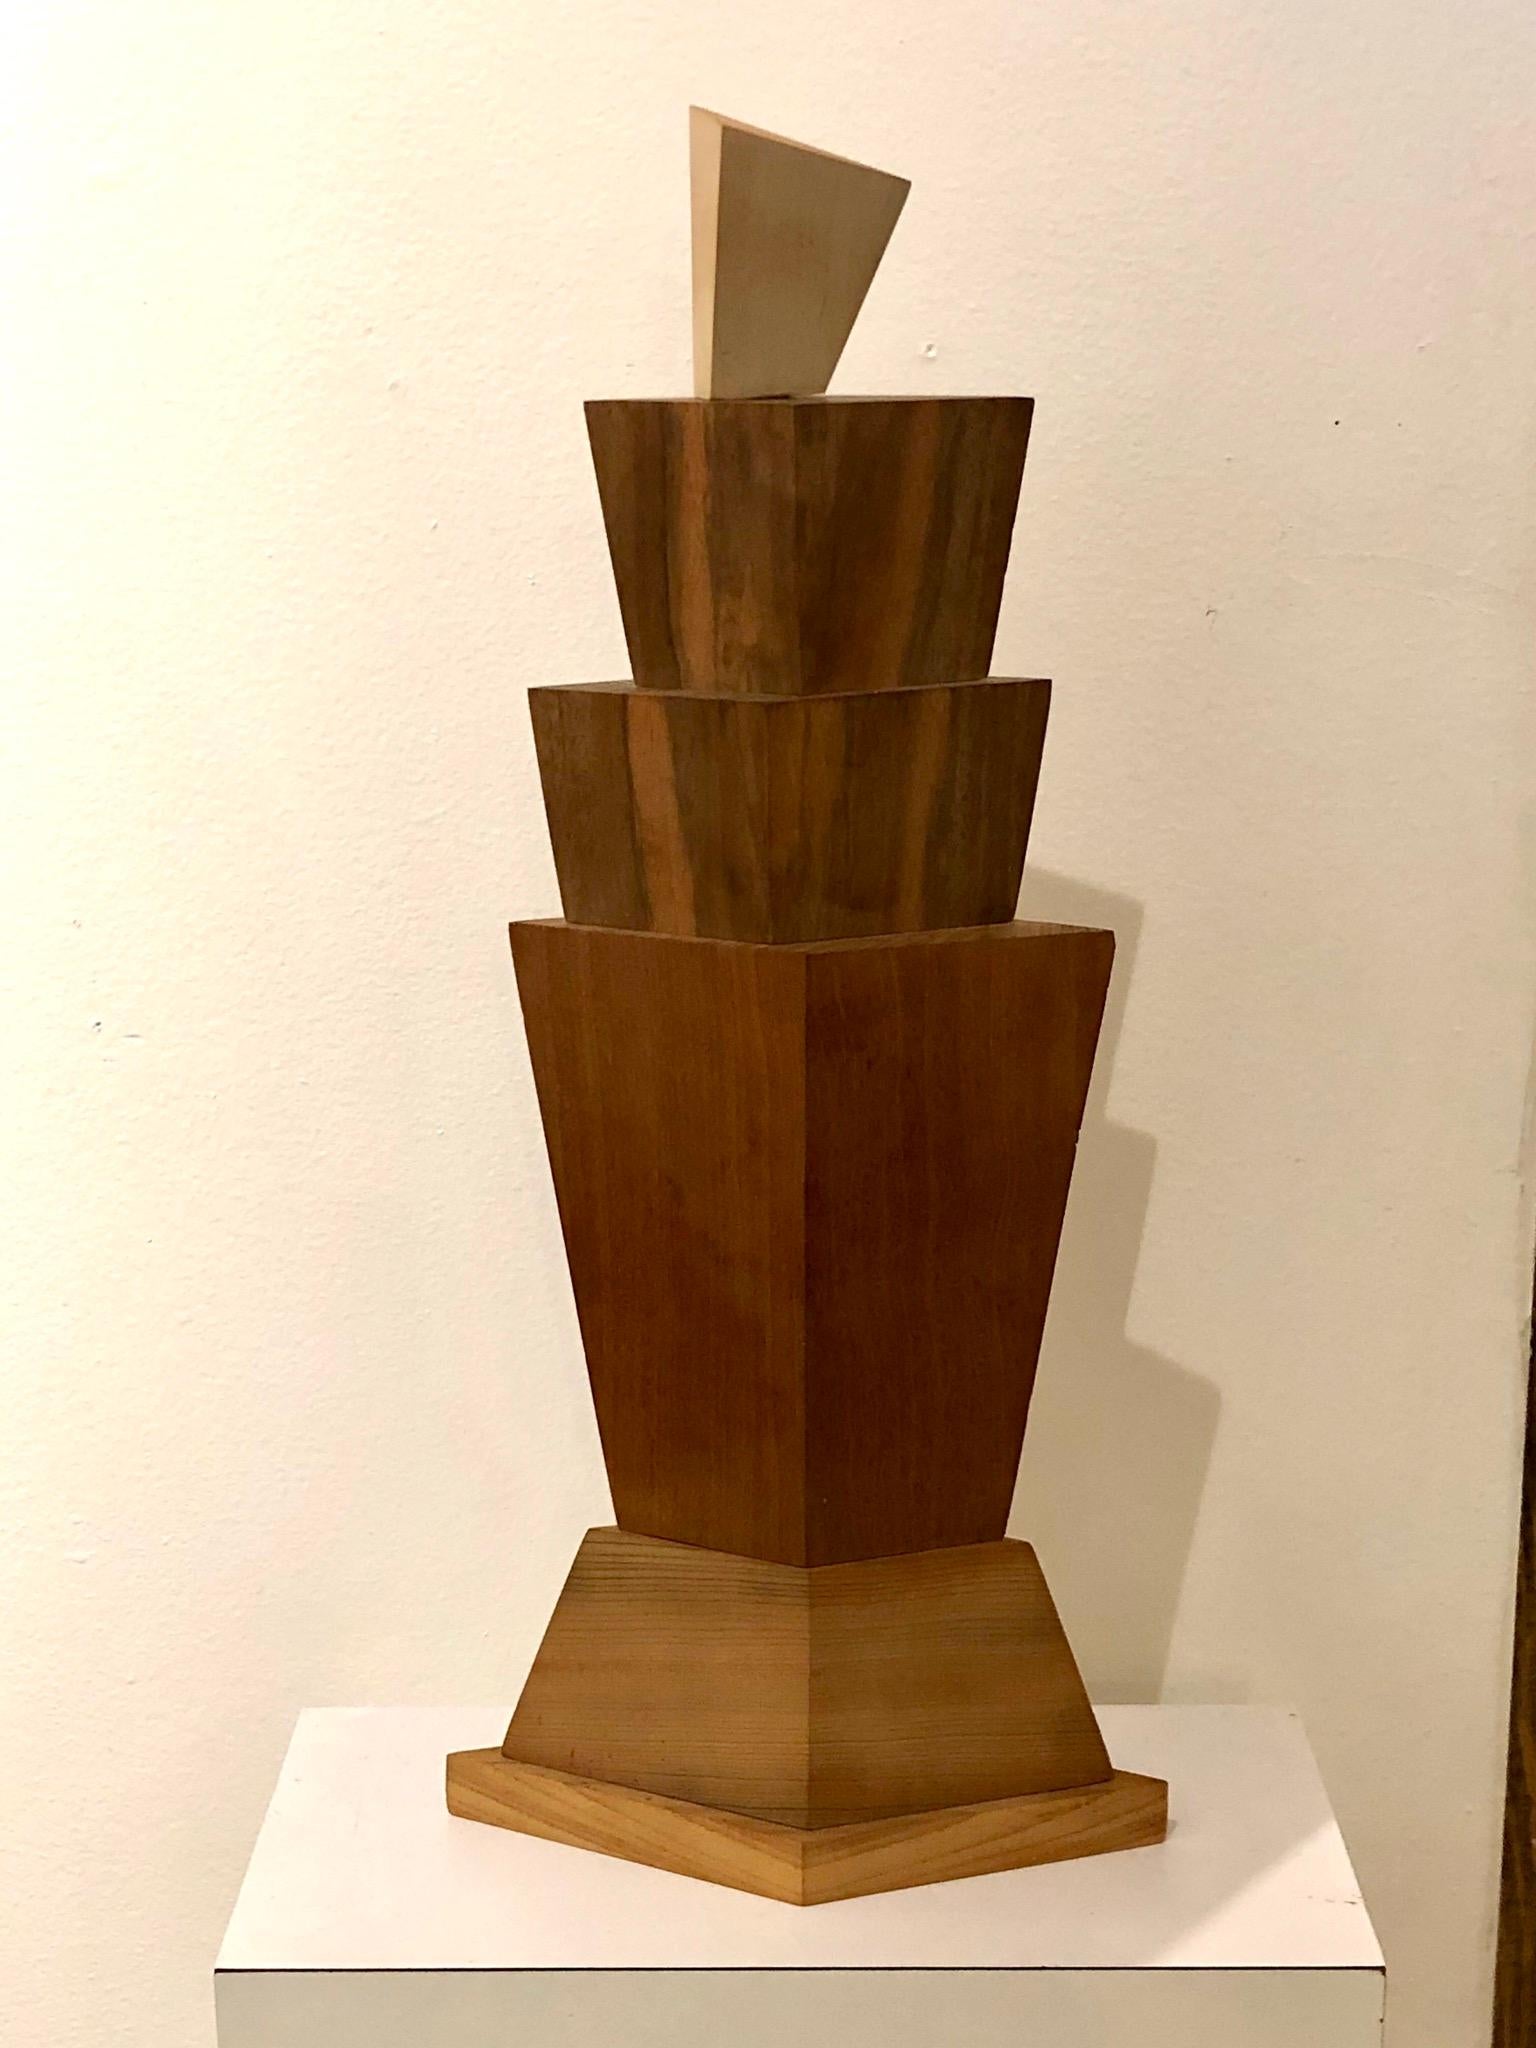 Postmodern Abstract Sculpture by La Jolla Artist John Rogers Signed/Dated 2003 In Good Condition For Sale In San Diego, CA